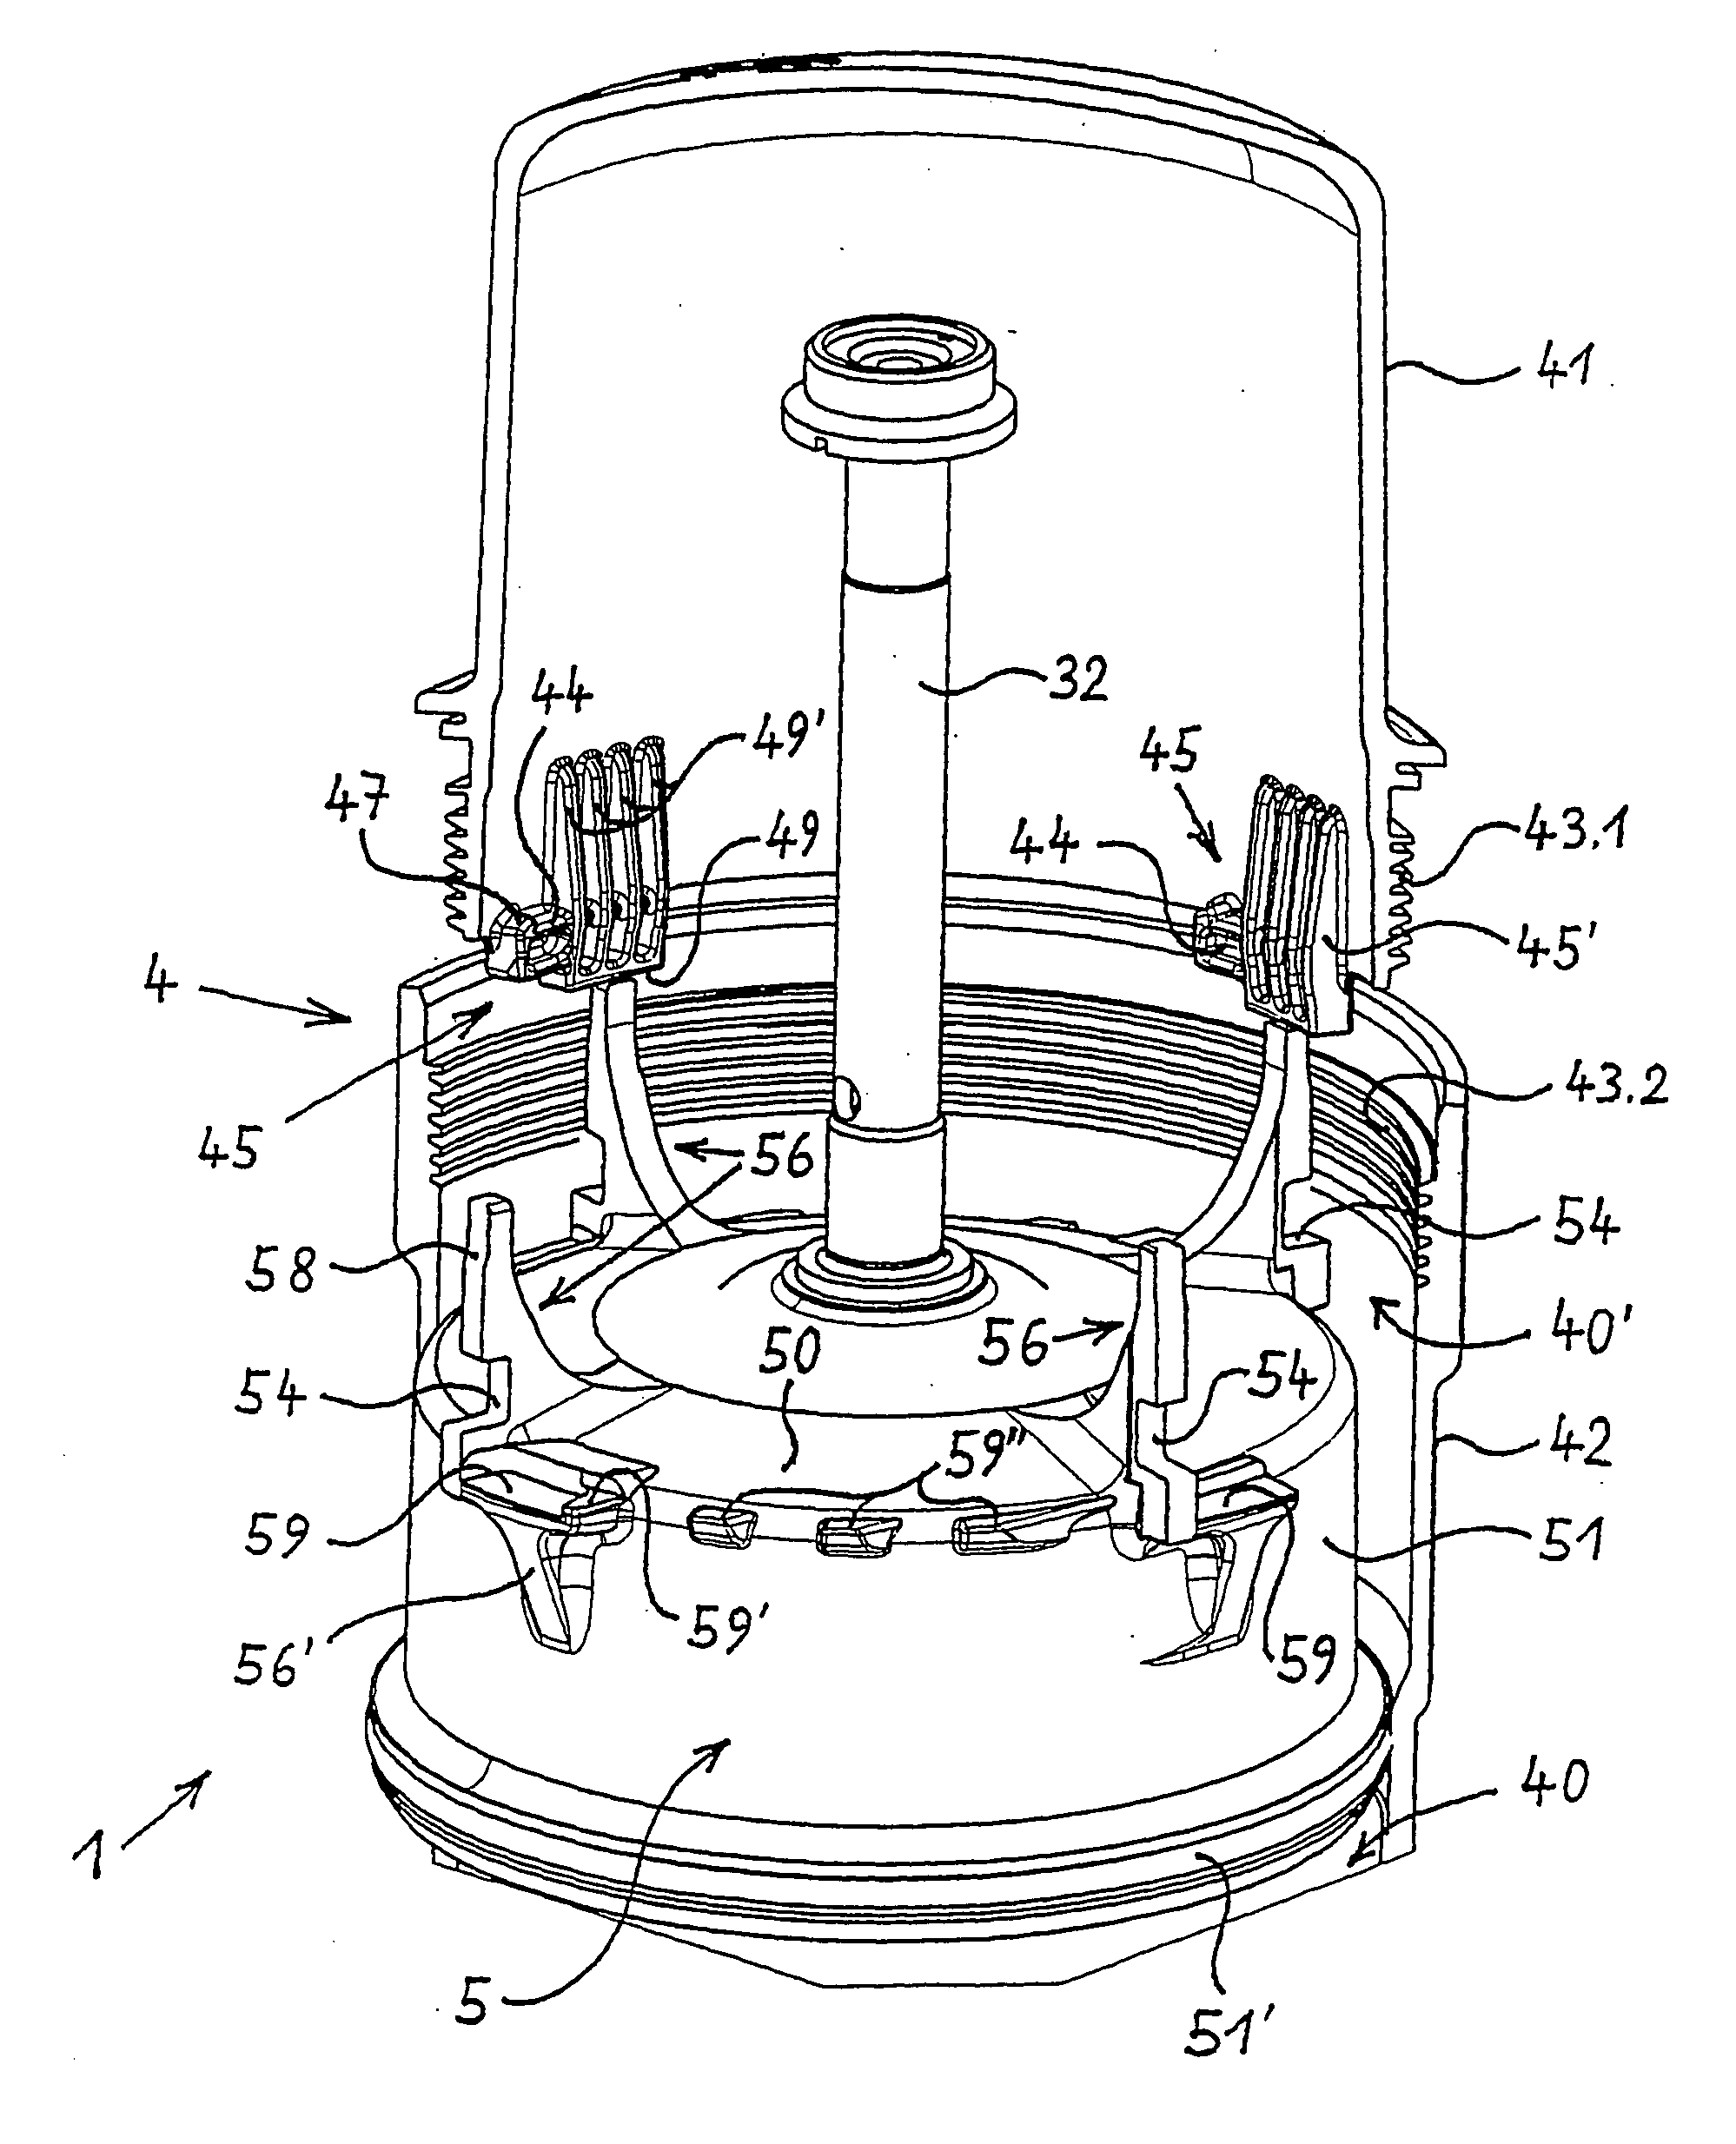 Device for Eliminating Impurities from the Lubricating Oil of an Internal Combustion Engine